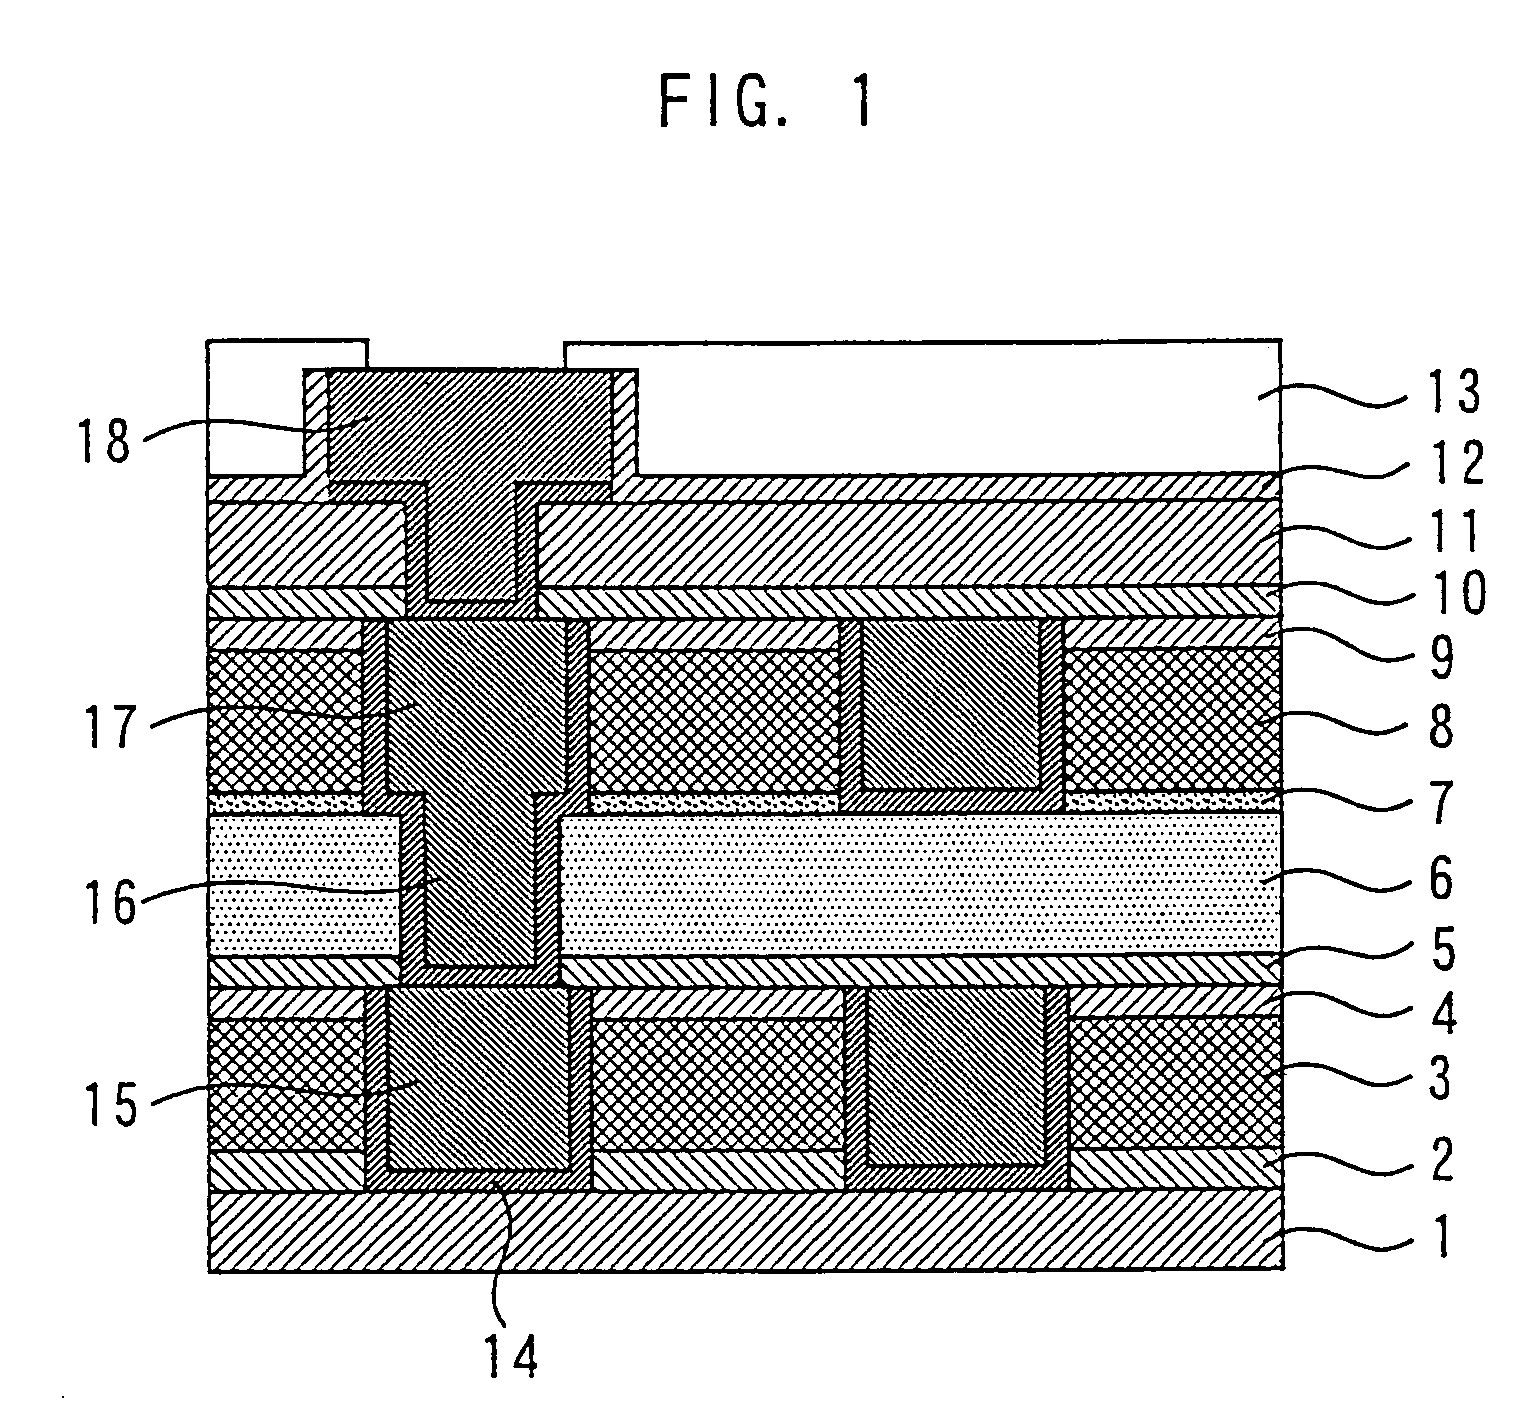 Method for manufacturing a semiconductor device that includes plasma treating an insulating film with a mixture of helium and argon gases